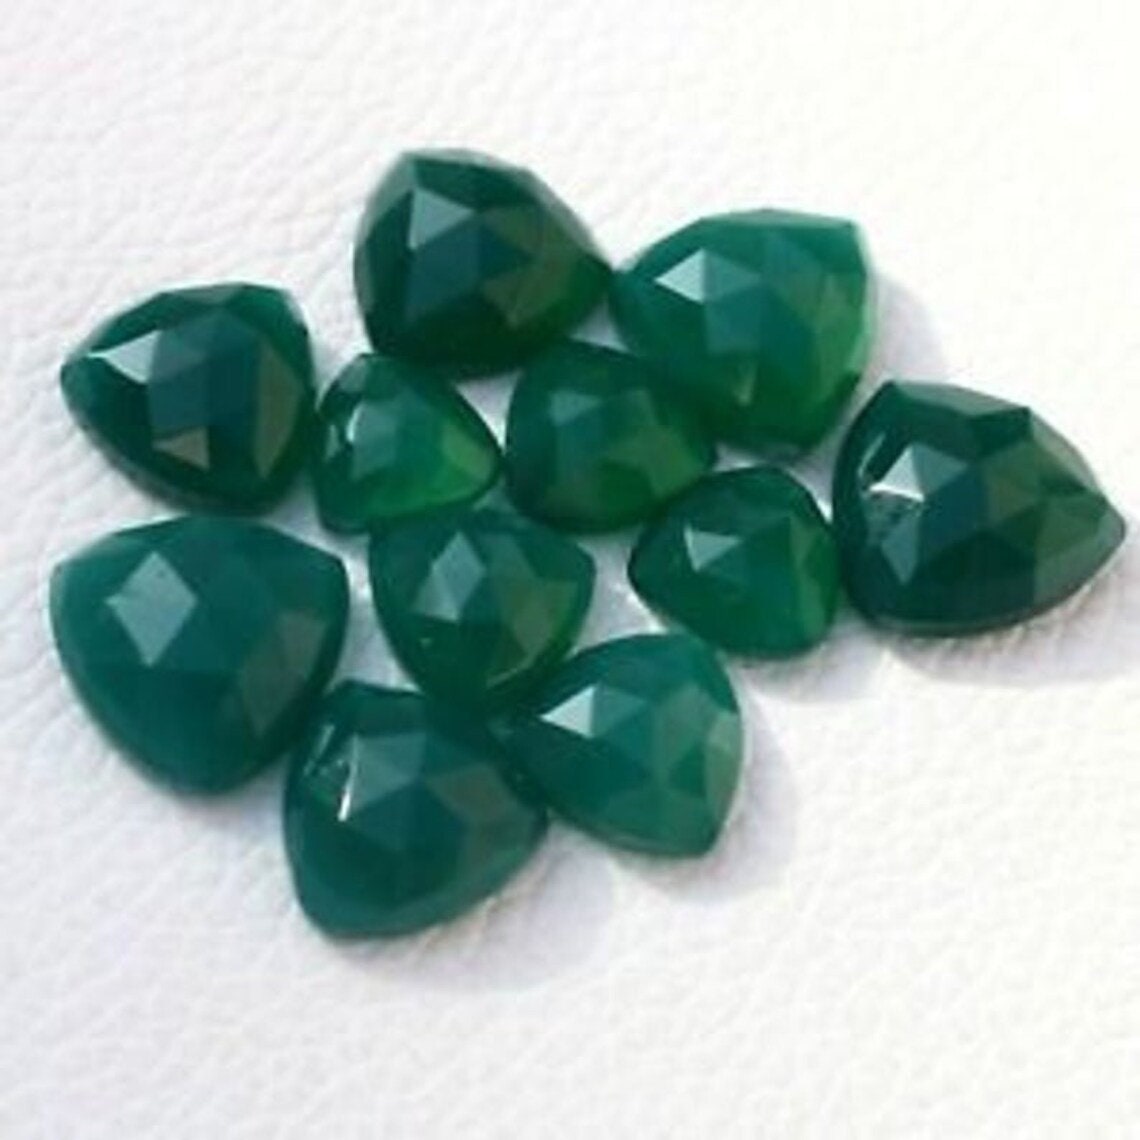 5 MM TRILLION CUT NATURAL GREEN ONYX  ALL NATURAL AAA 8 PC SET 